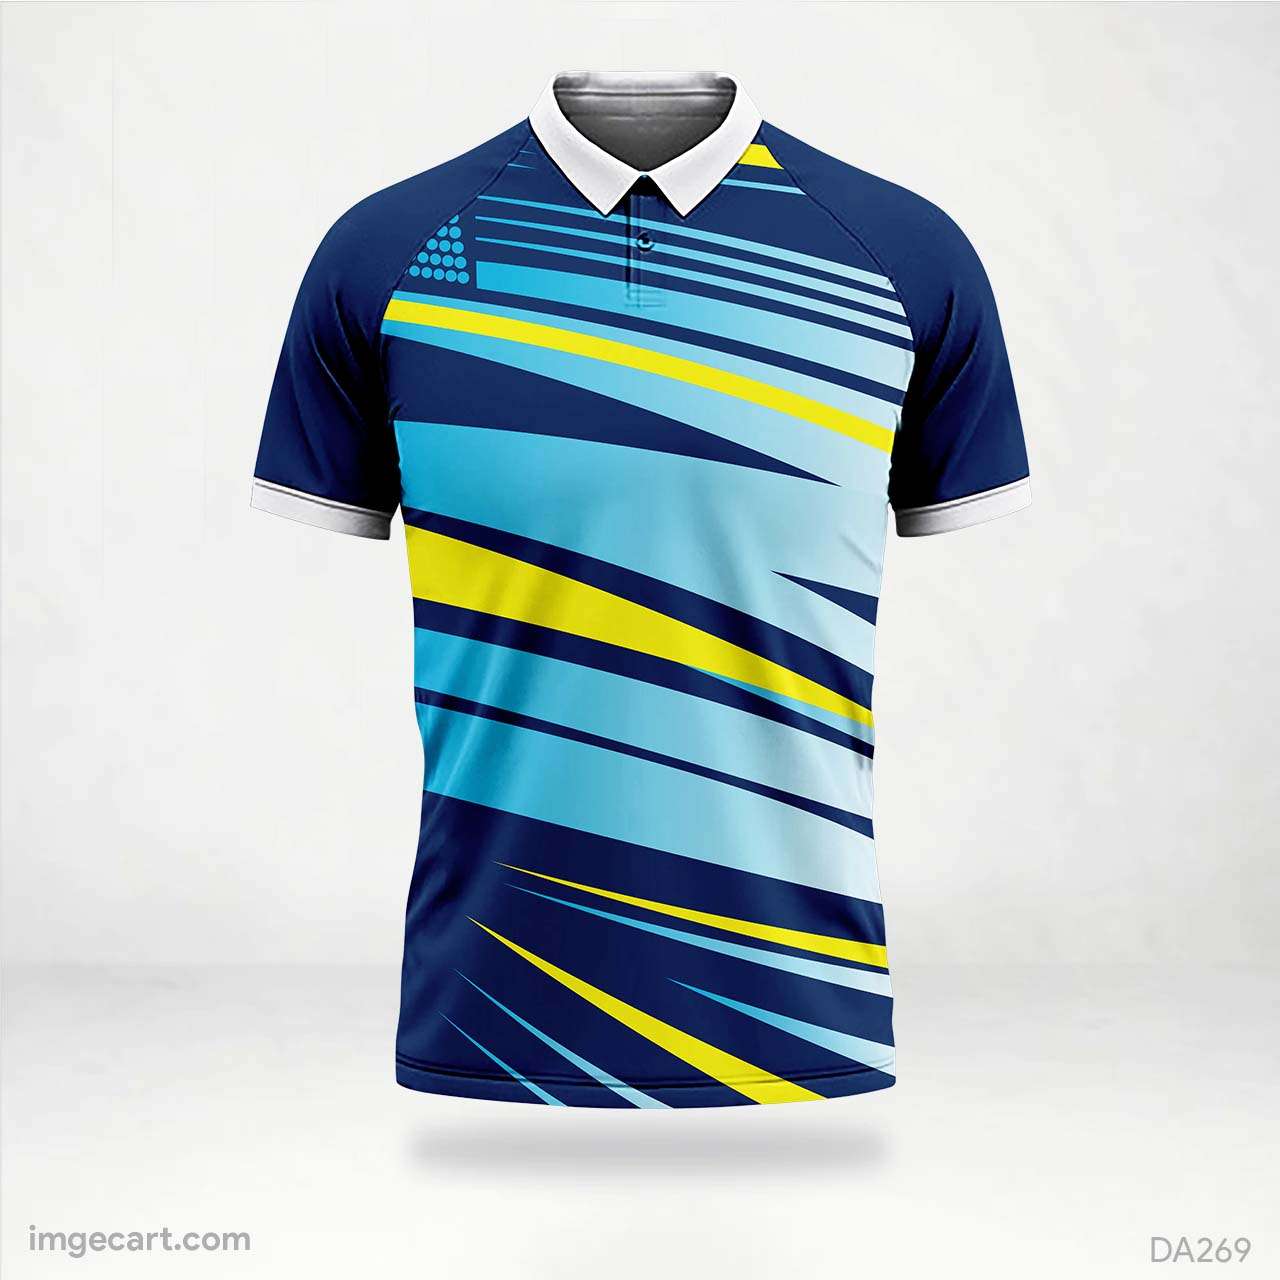 E-sports Jersey Design Blue with Yellow pattern Sublimation - imgecart